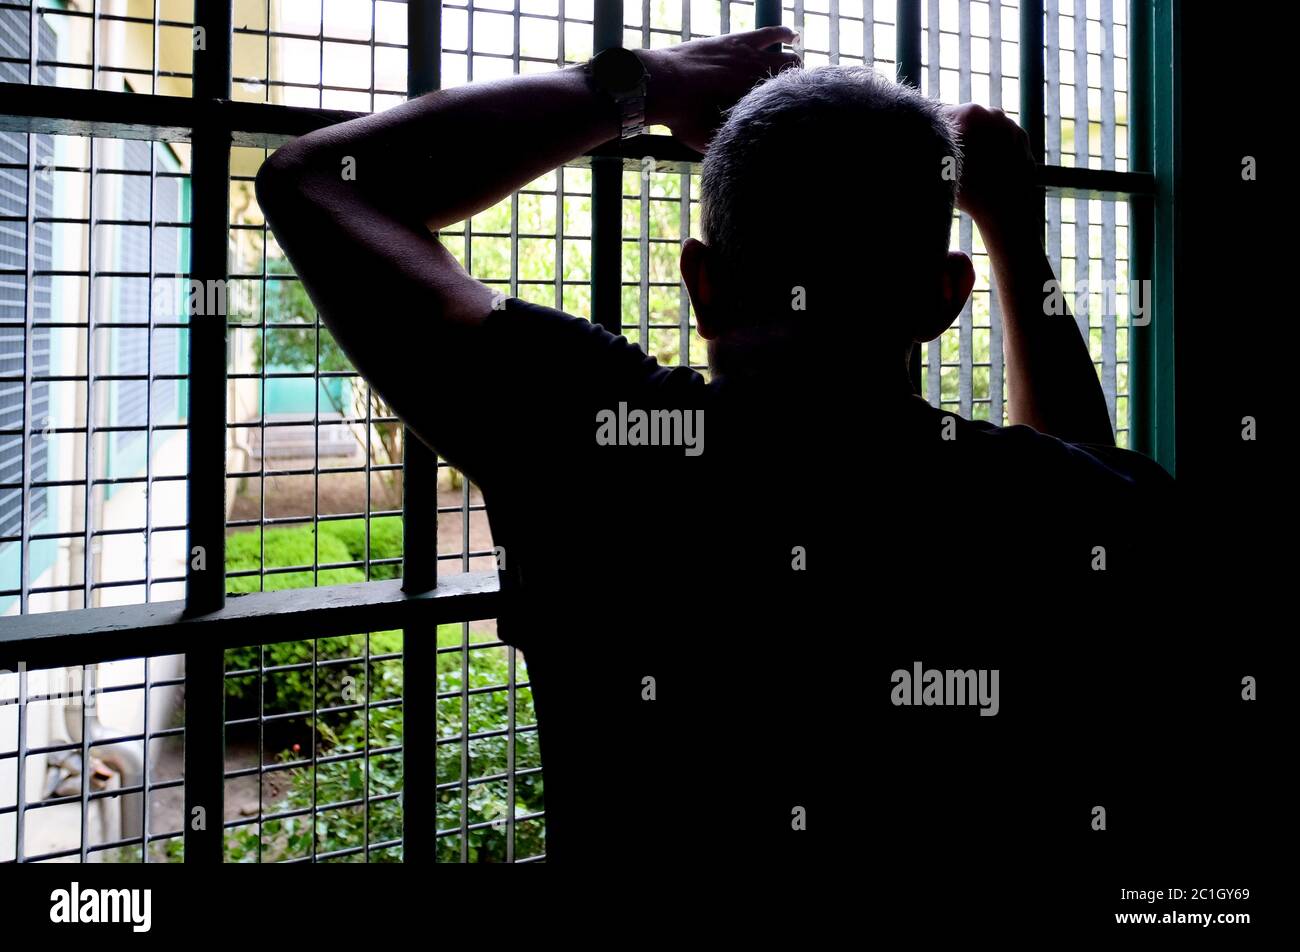 silhouette man leaning against a window bars. Prisoner concept Stock Photo